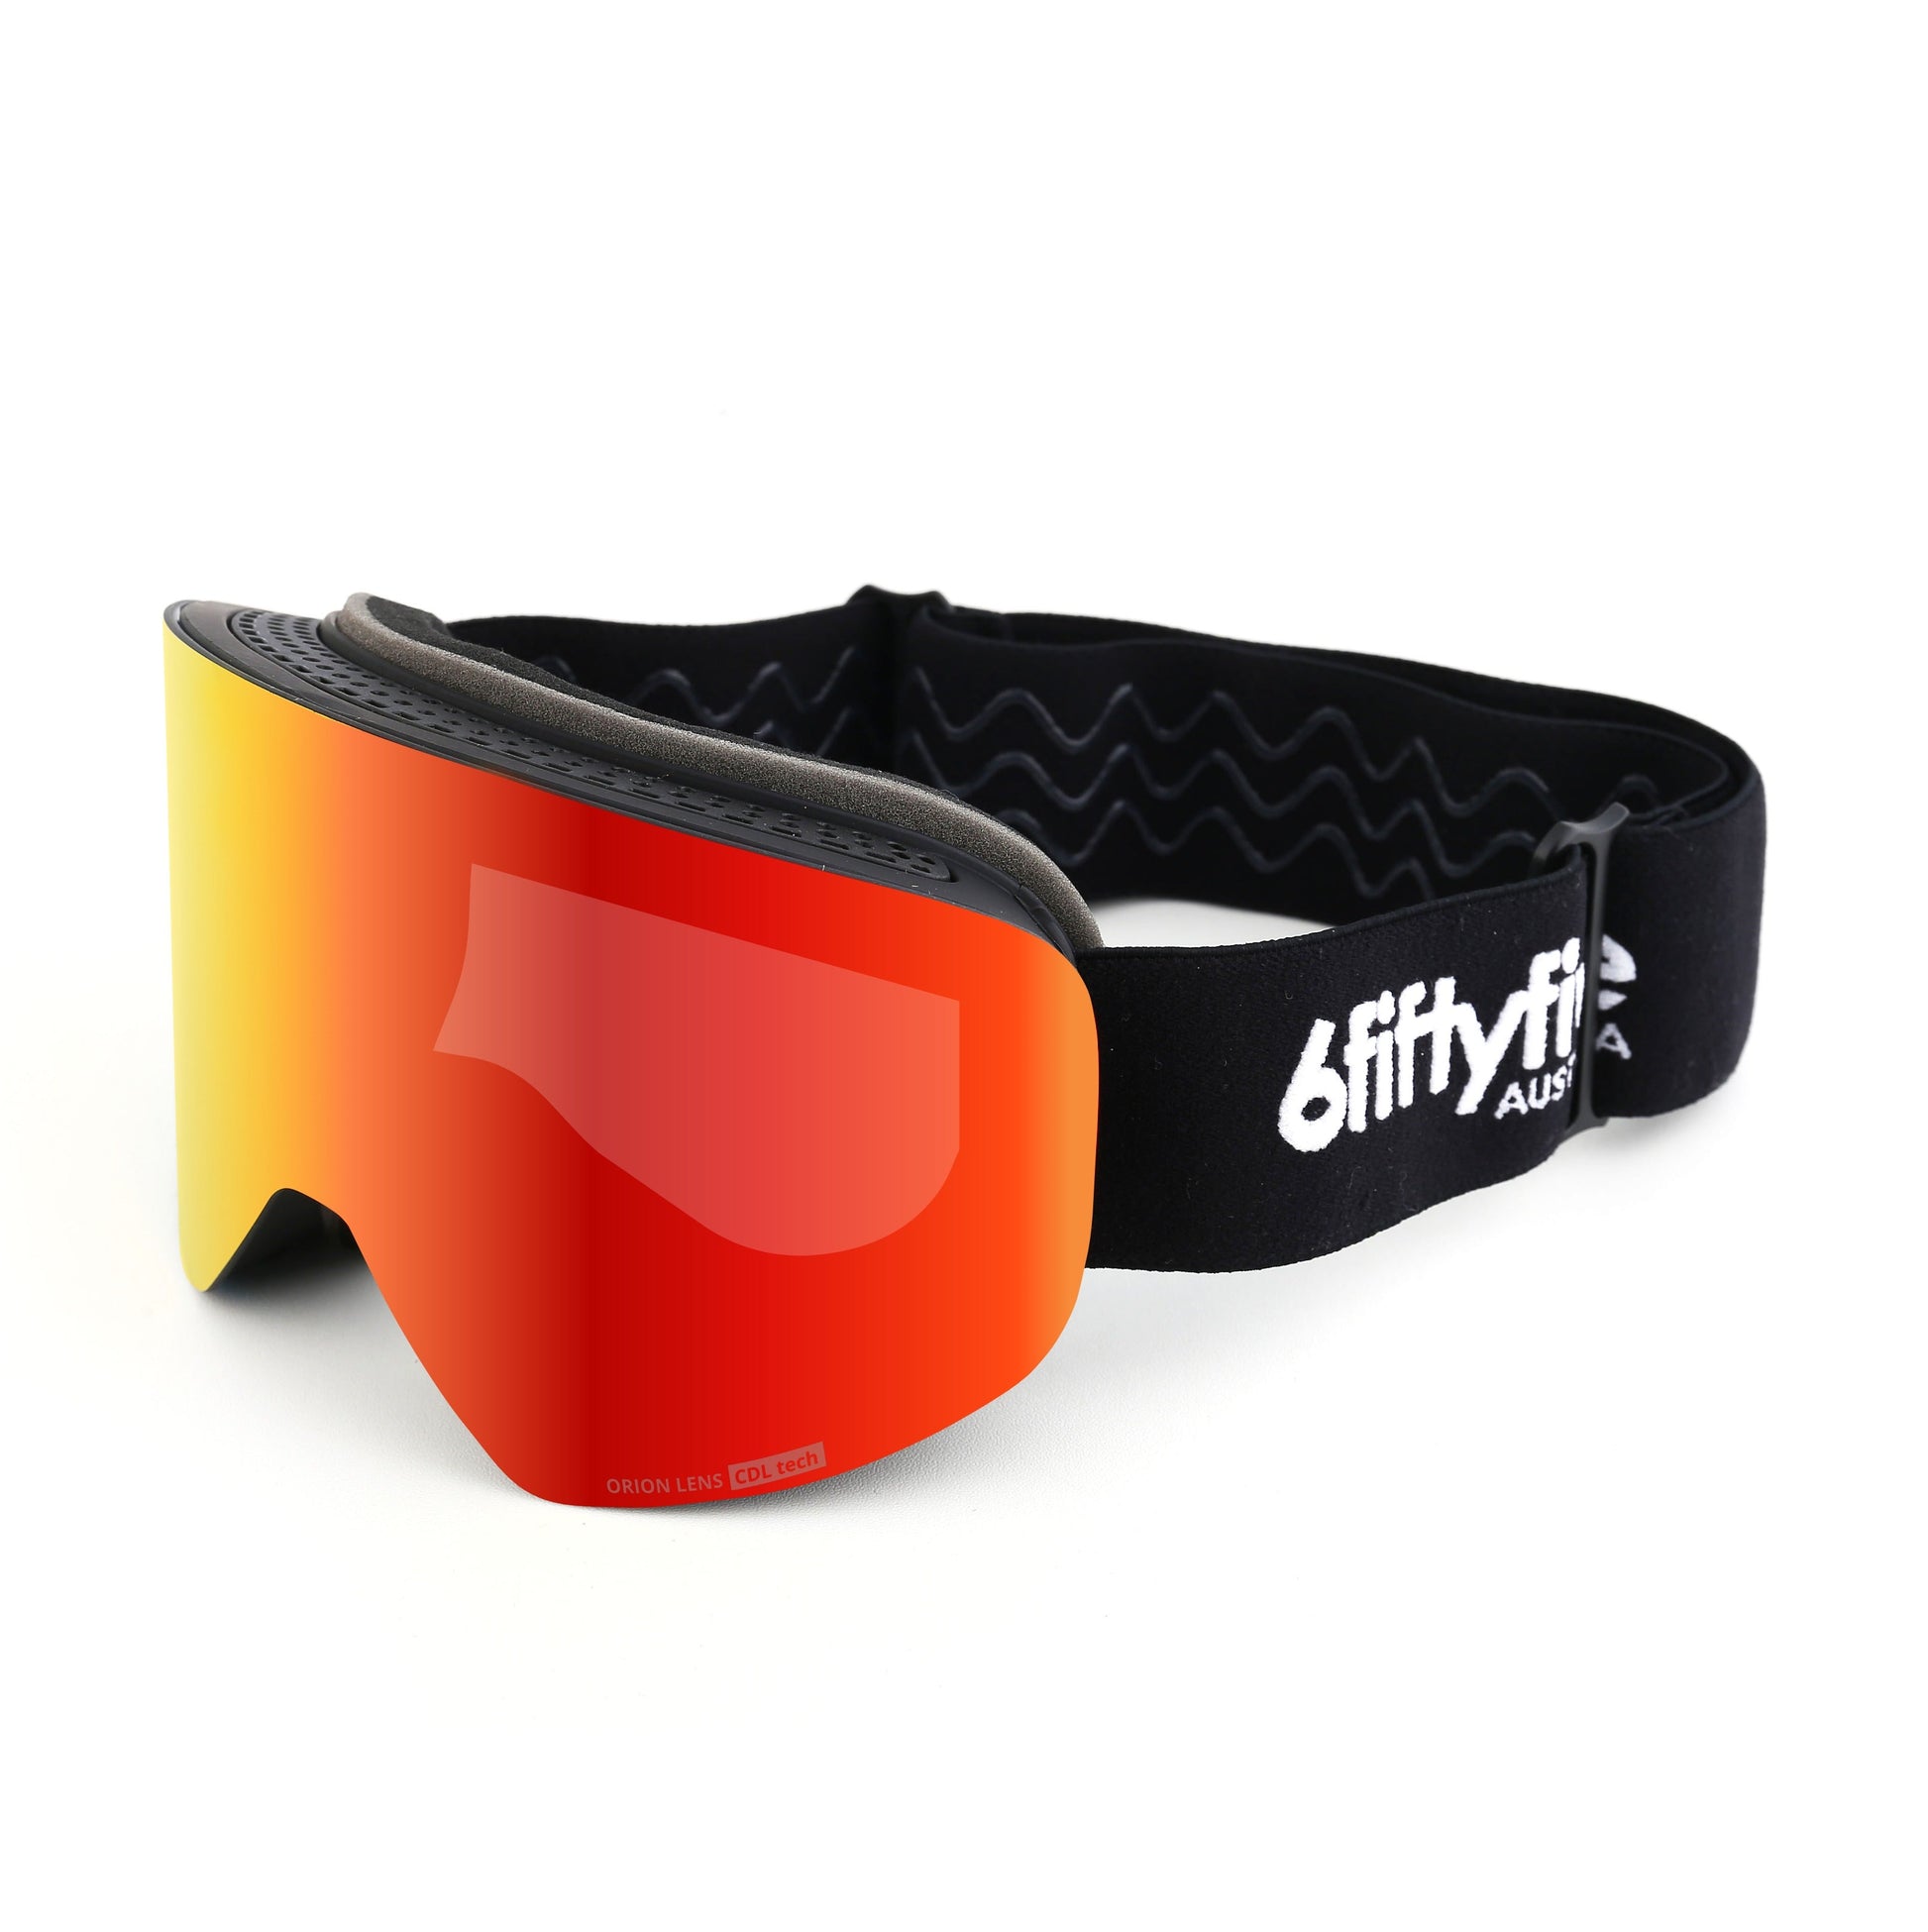 6fiftyfive frameless ski goggles for men and women - multilayer, magnetic, full REVO - FIRE RED - 6fiftyfive